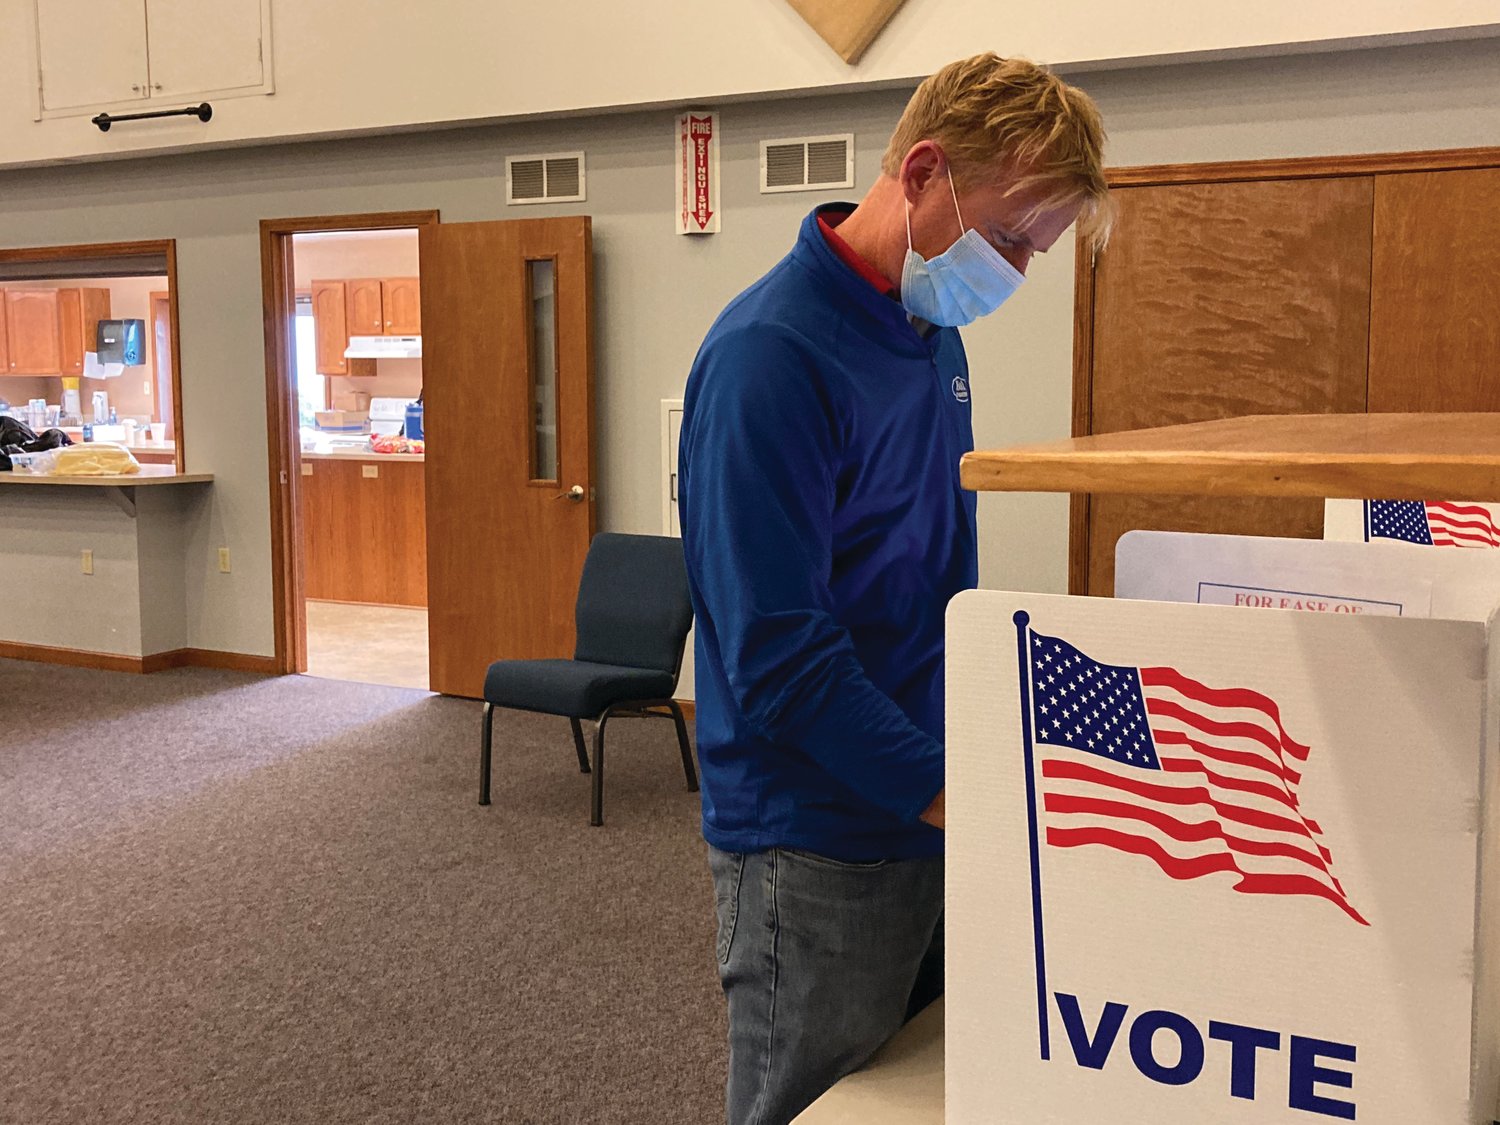 Shawn Blackwell votes at Whitesville Christian Church Tuesday. Just over 200 votes had been cast at the church by mid-morning.